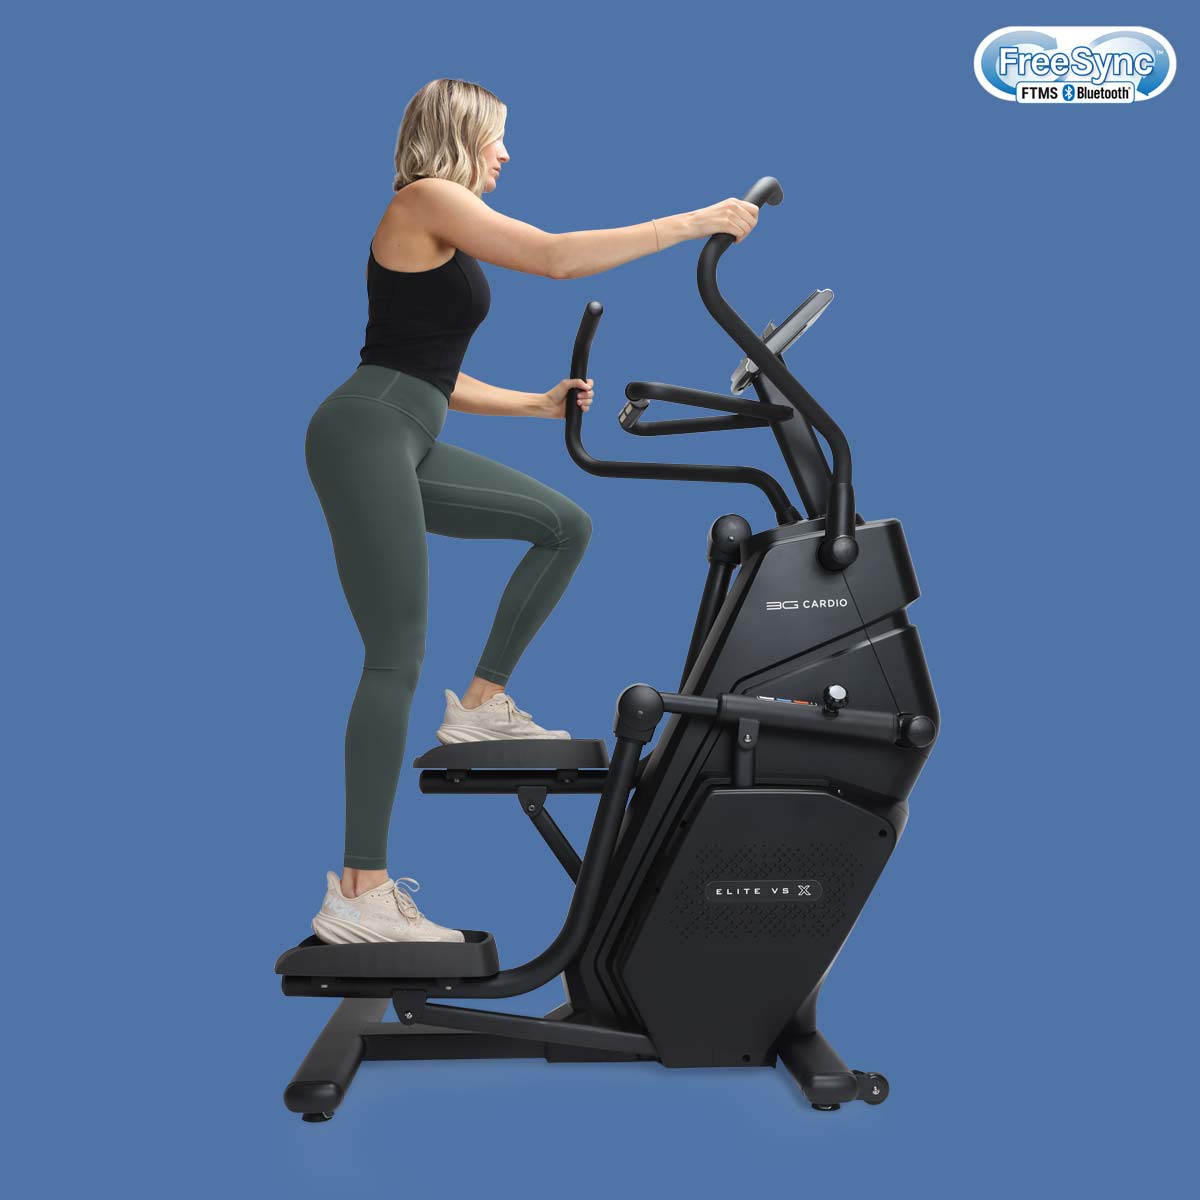 3G Cardio Elite VS X Vertical Stair Stepper with FreeSync™ FTMS Bluetooth®